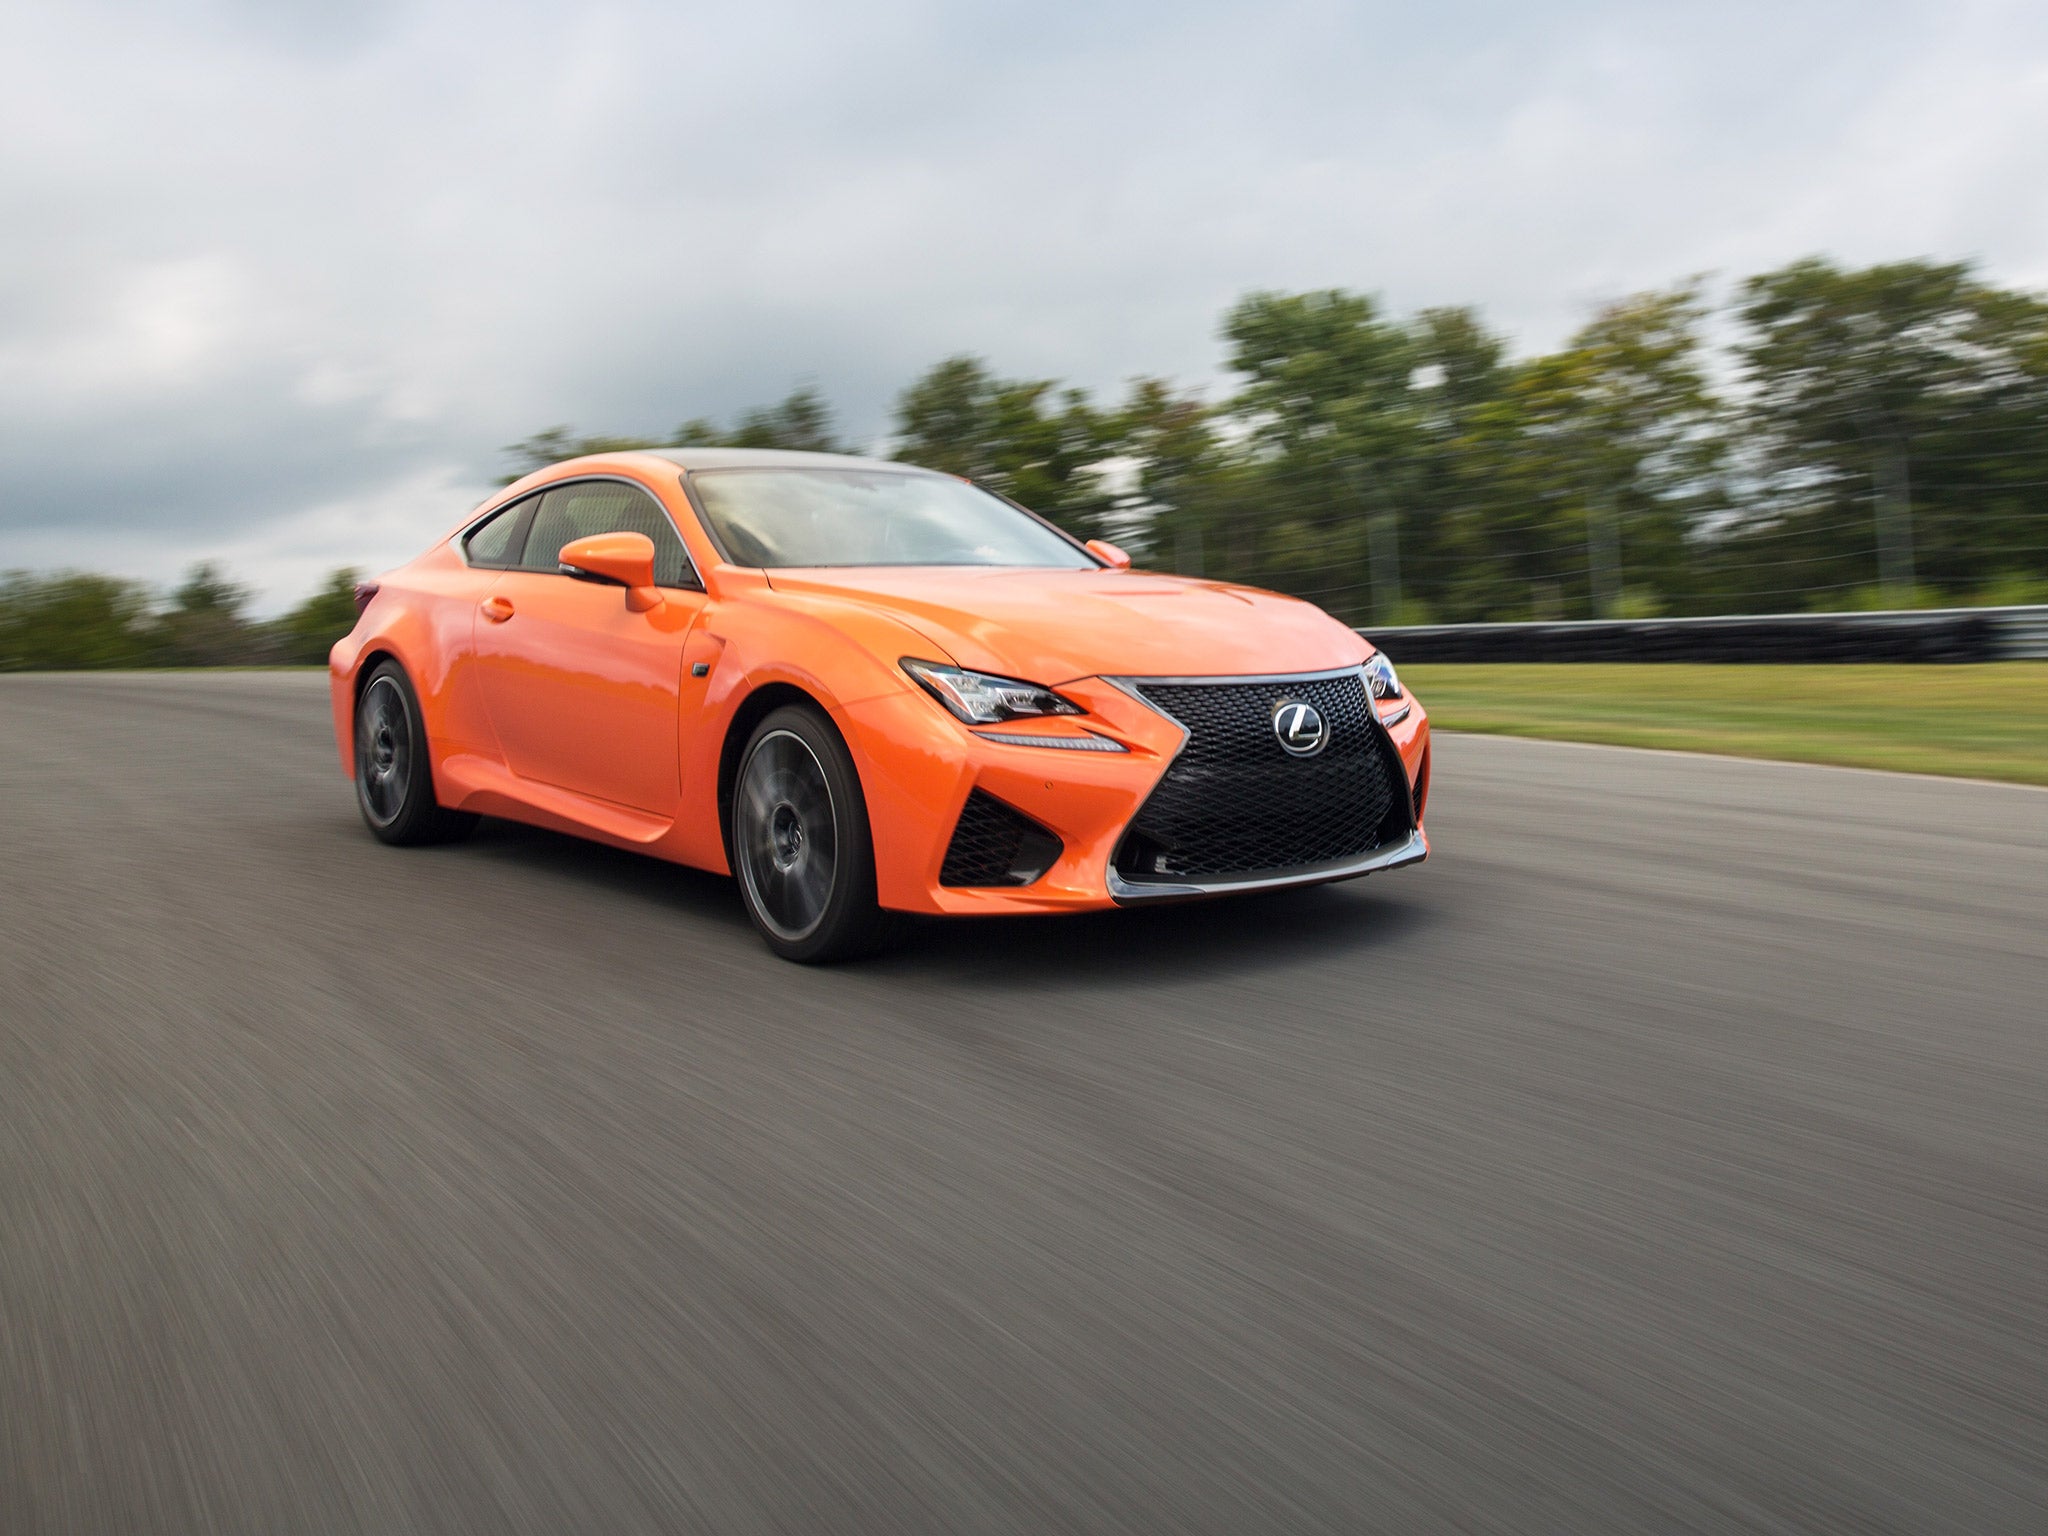 Lexus RC F - I drove the last car Clarkson reviewed for Top Gear, The  Independent